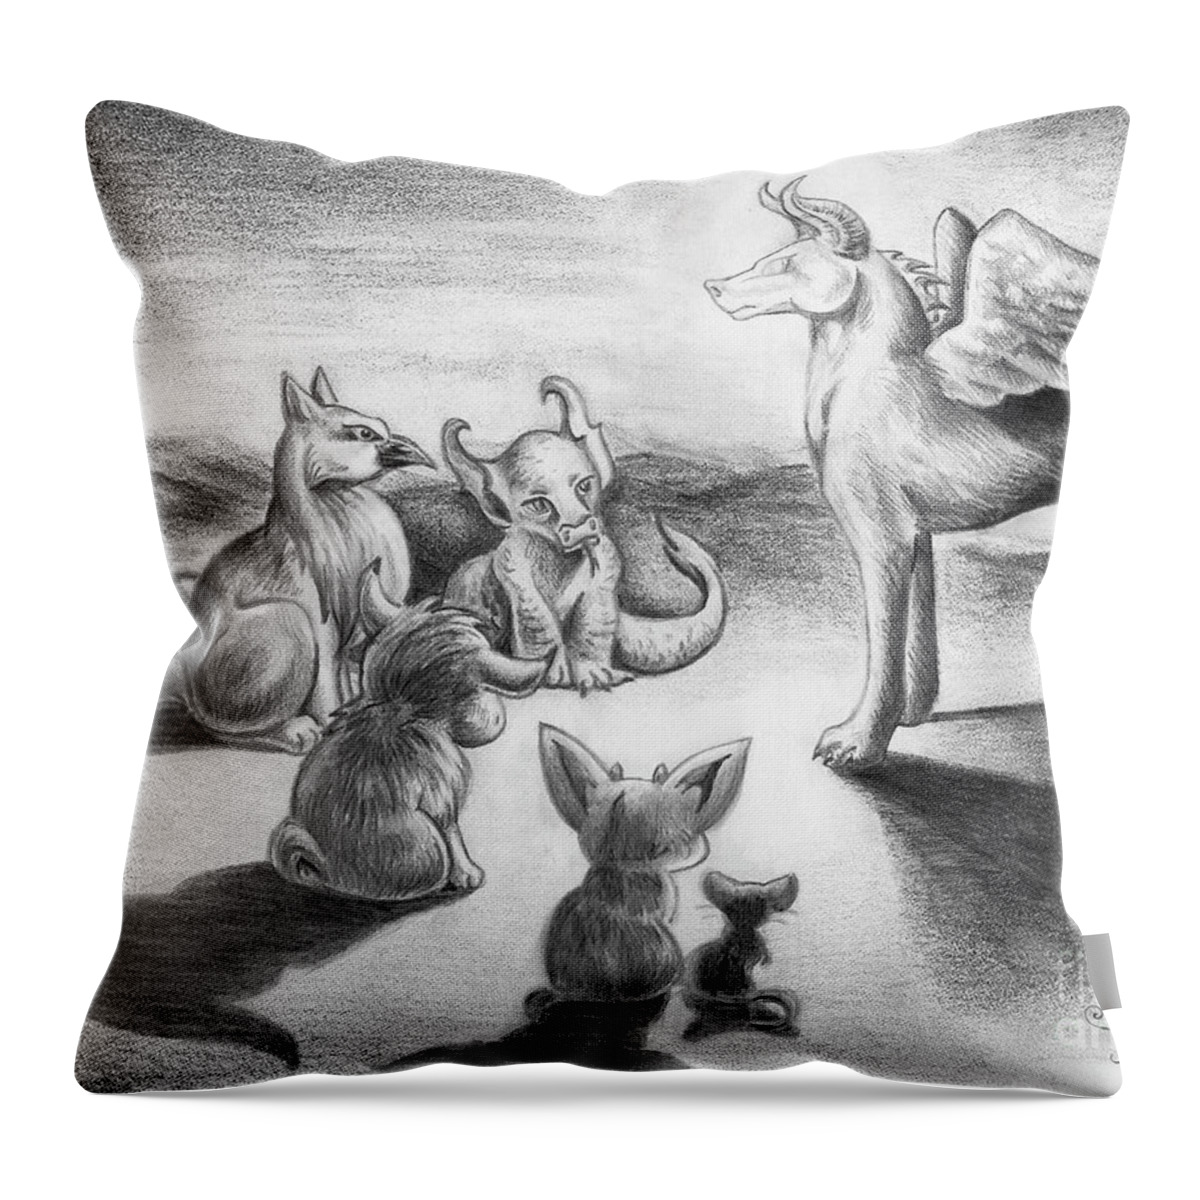 Fantasy Throw Pillow featuring the drawing Plotting by Sipporah Art and Illustration